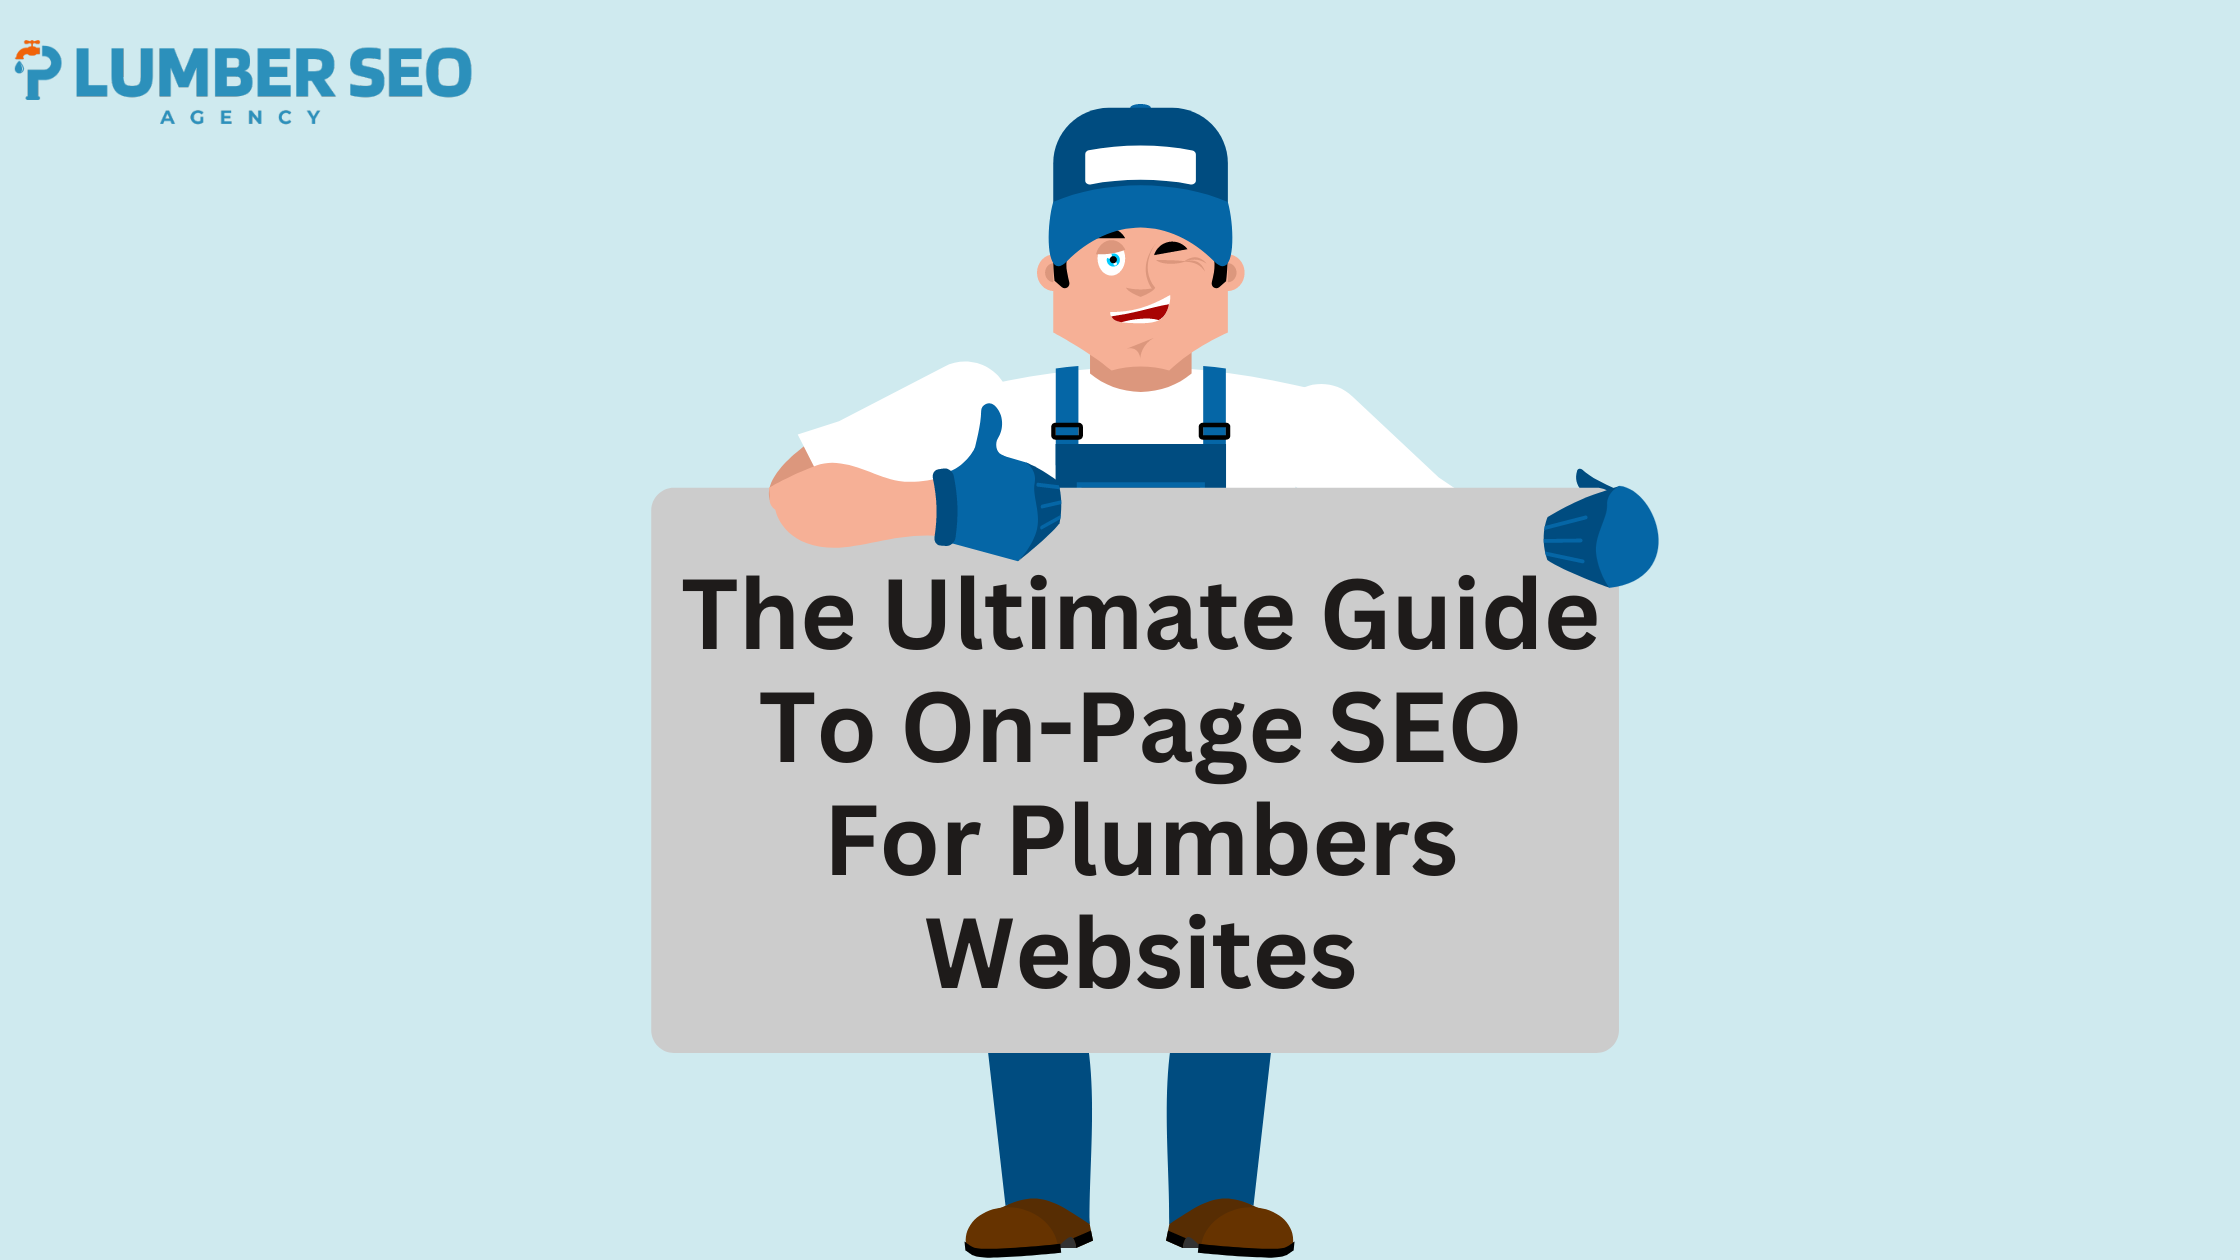 The Ultimate Guide to On-Page SEO for Plumbers Websites